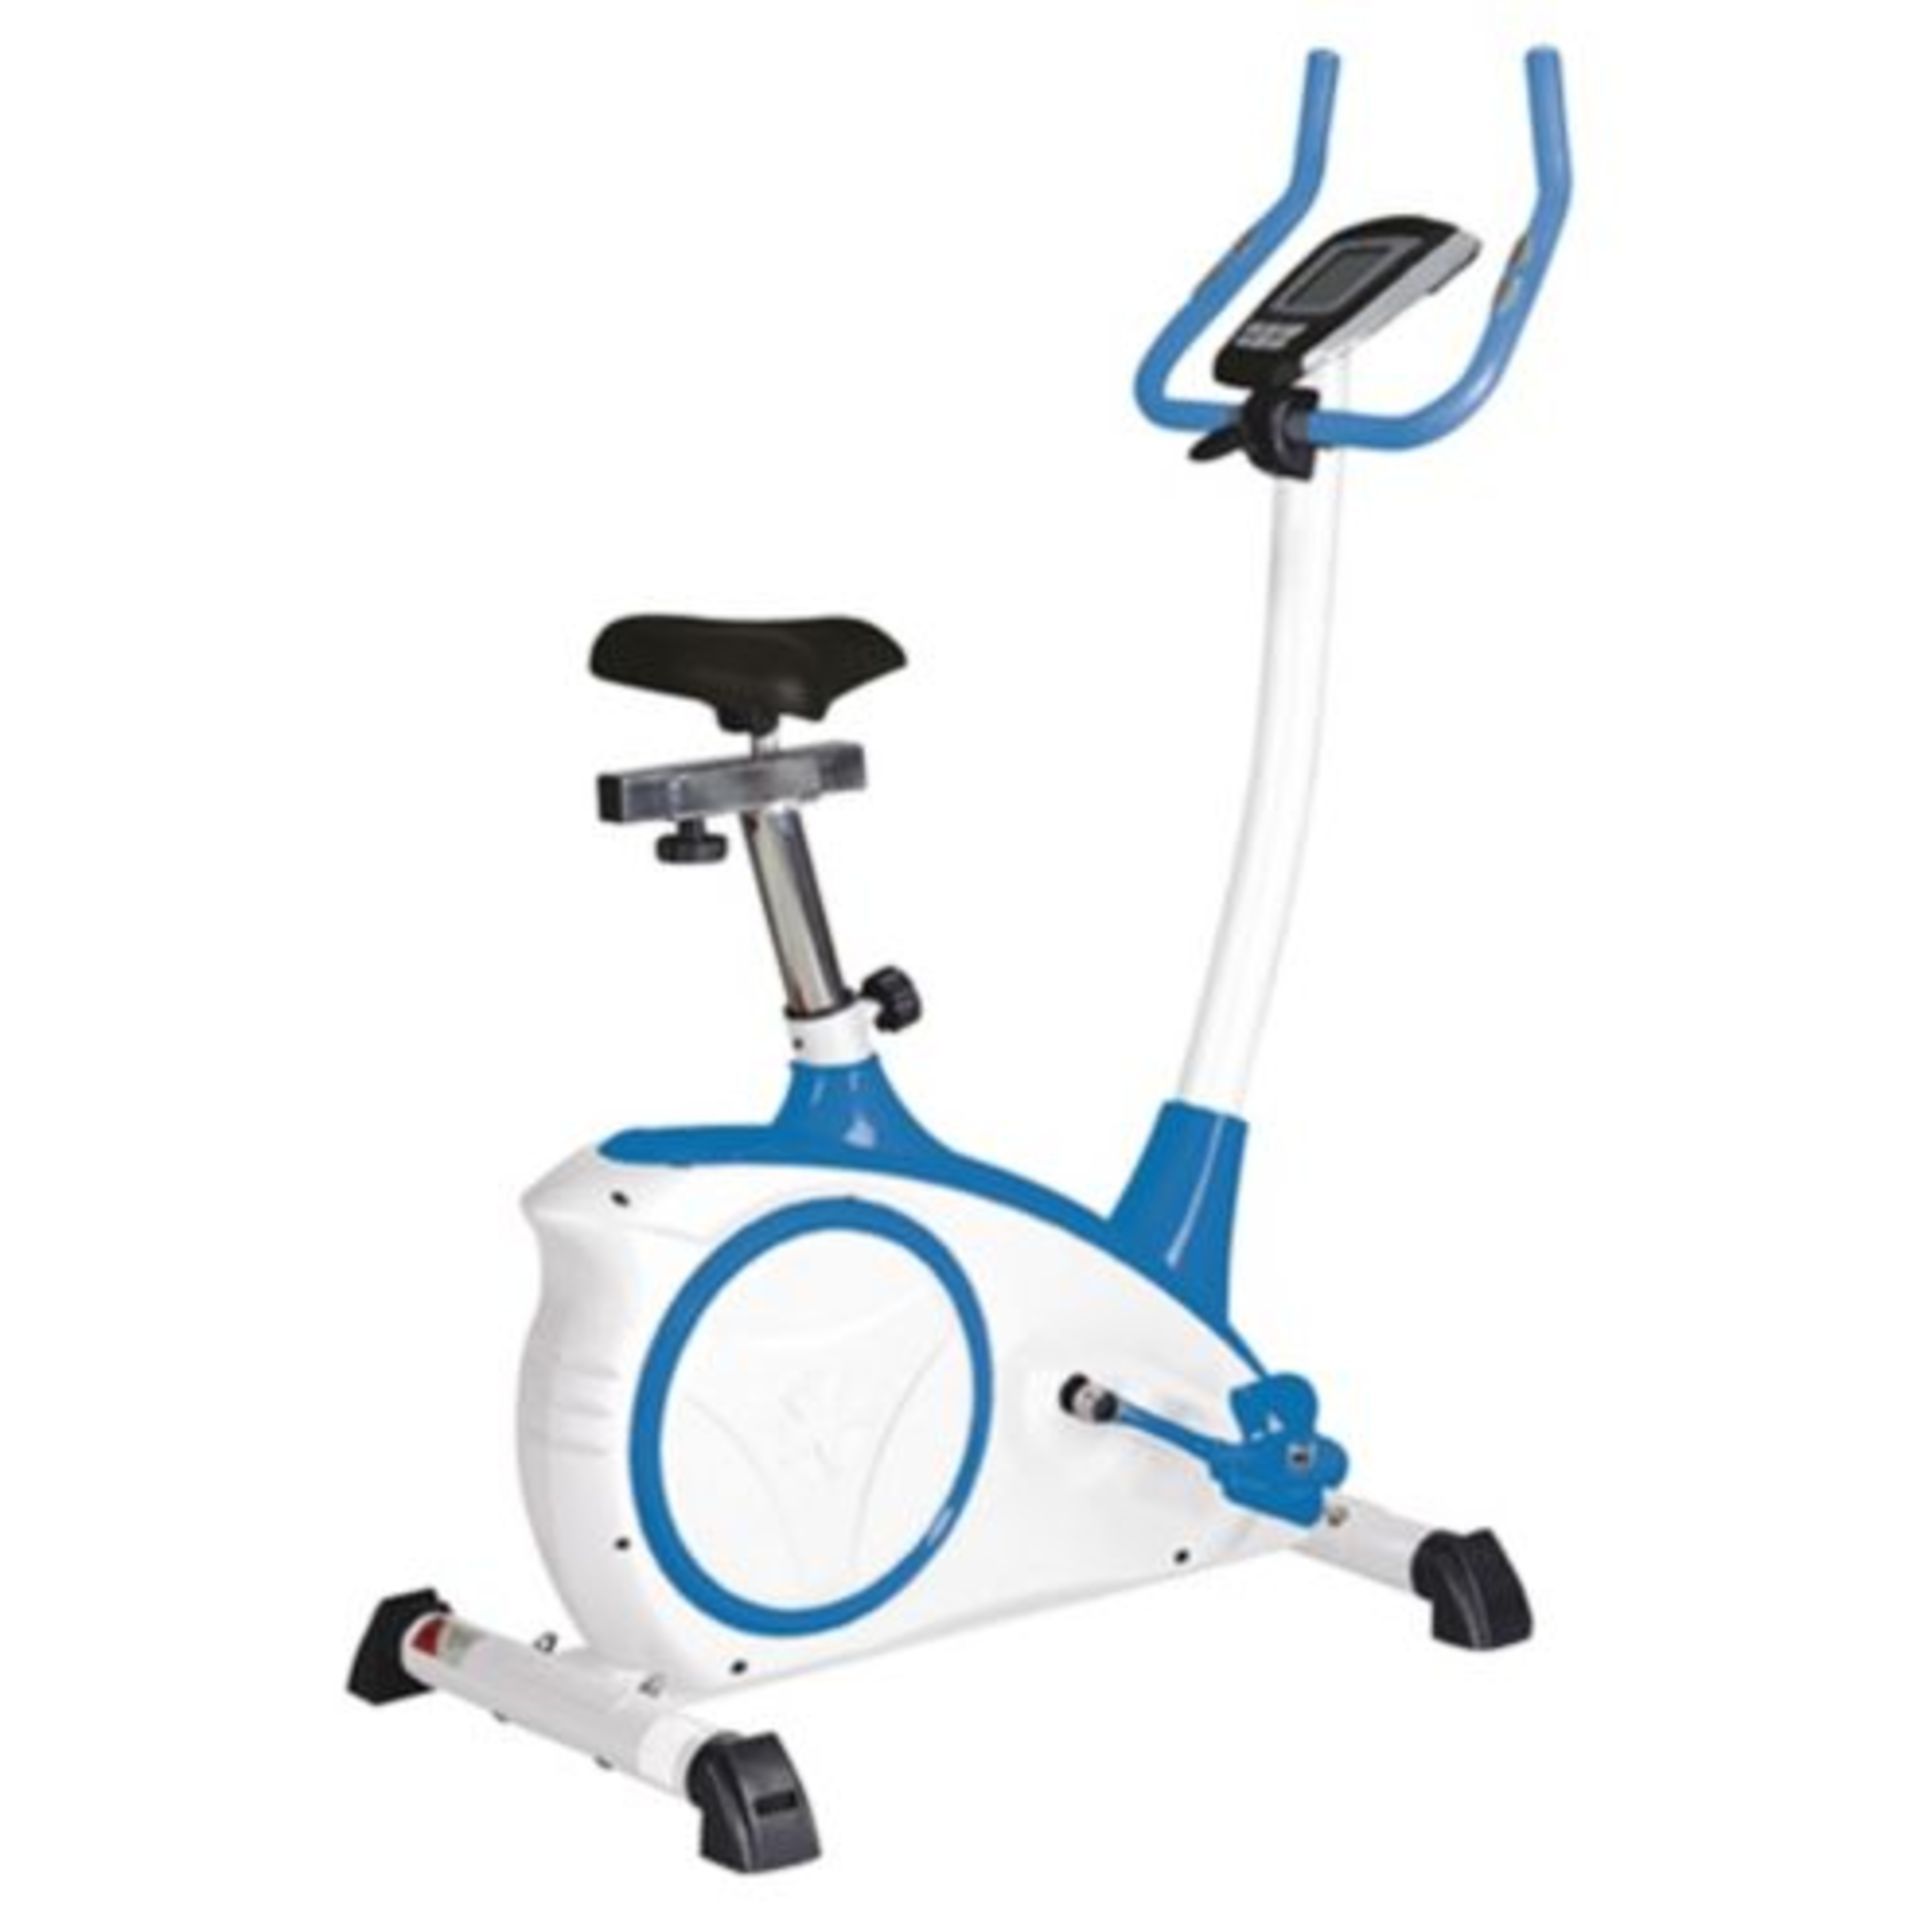 V Brand New Magnetic Exercise Bike With LCD Screen Displaying Heart Rate, Speed, Distance and